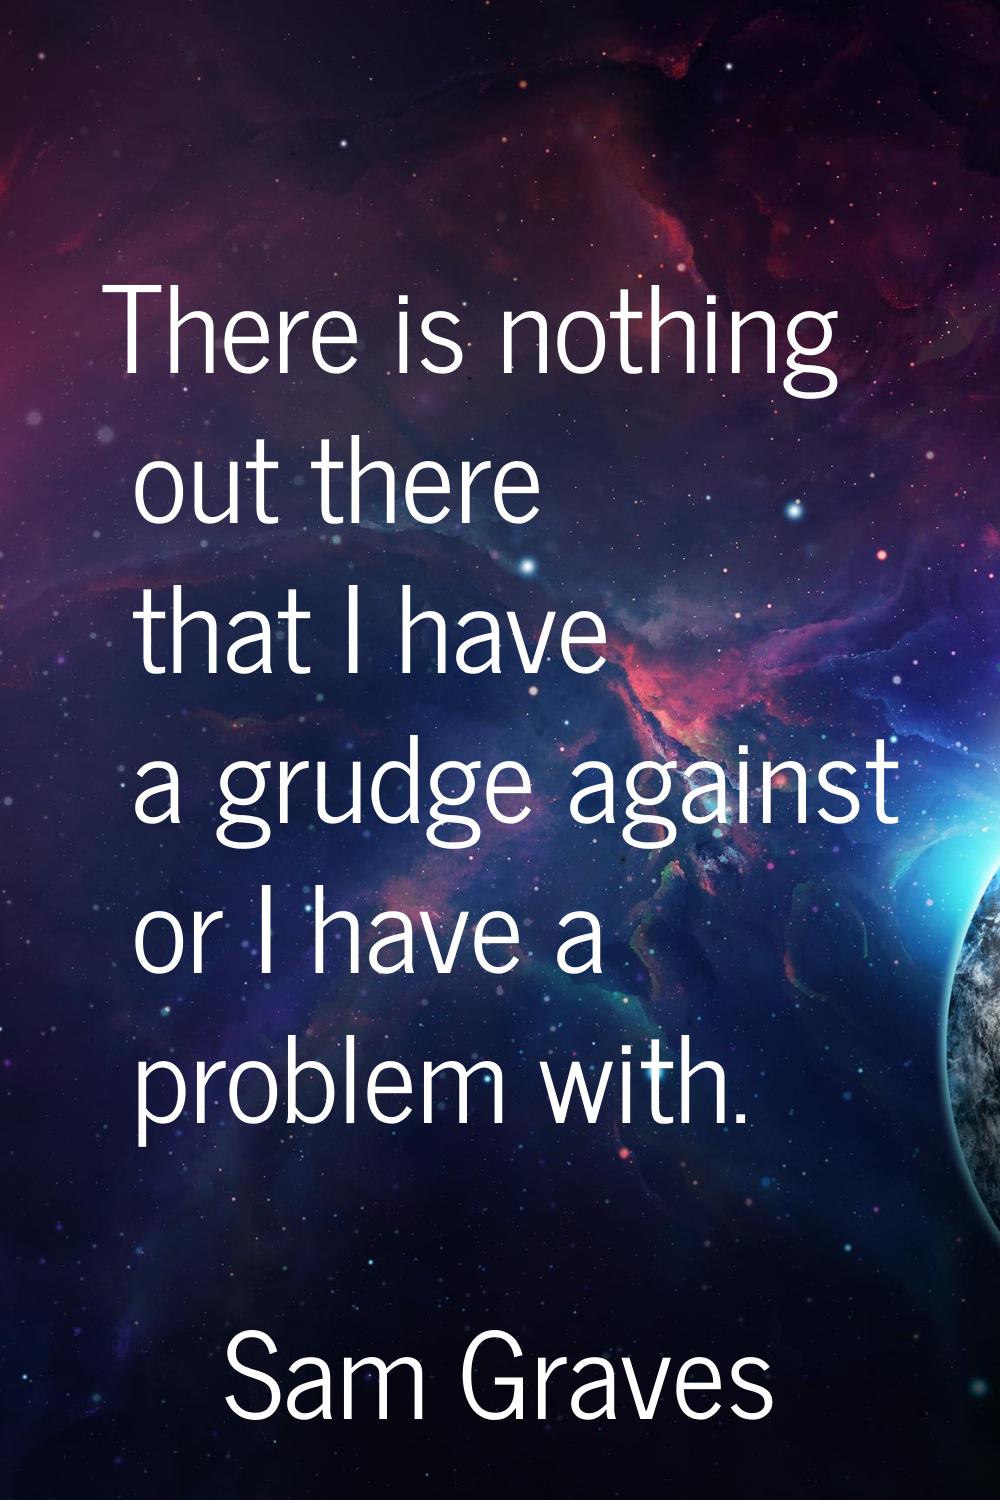 There is nothing out there that I have a grudge against or I have a problem with.